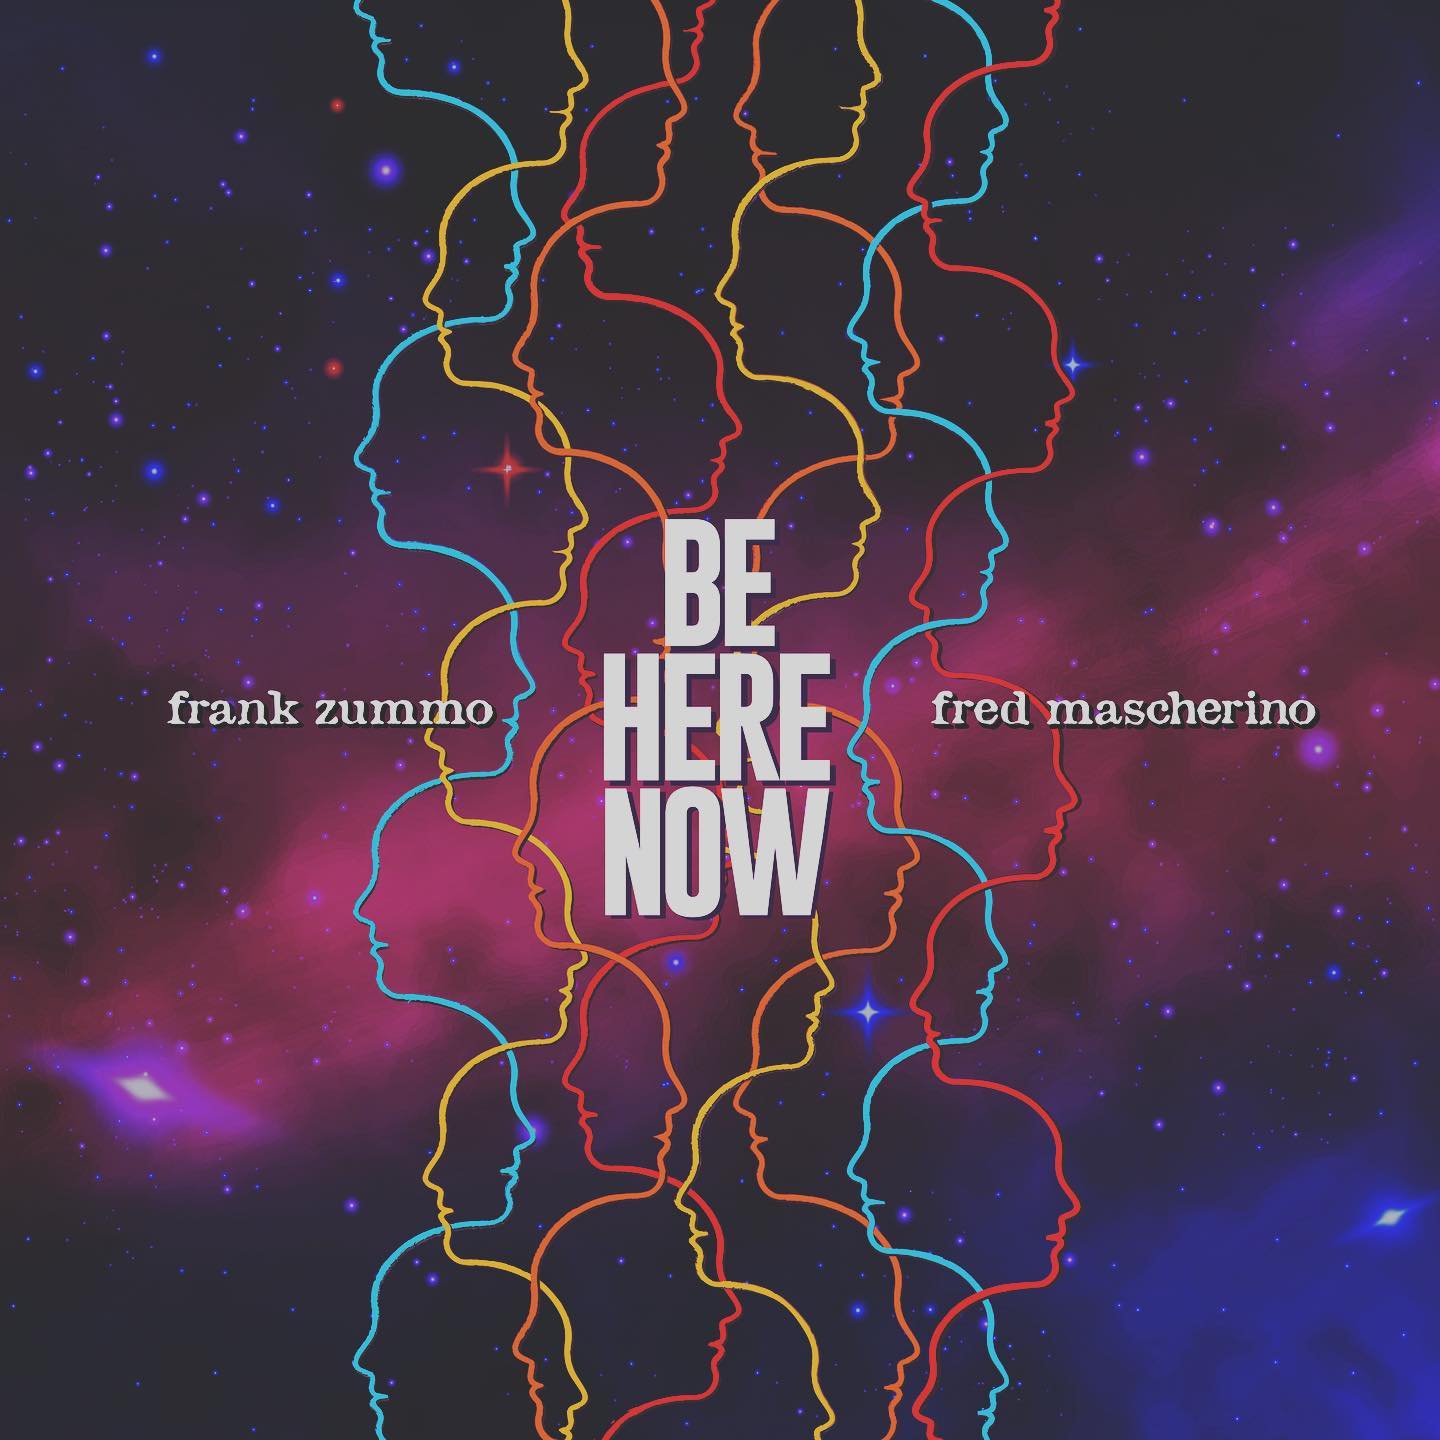 The Color Freds Fred Mascherino and SUM 41s Frank Zummo Join Forces for New Positive Anti-tech Single